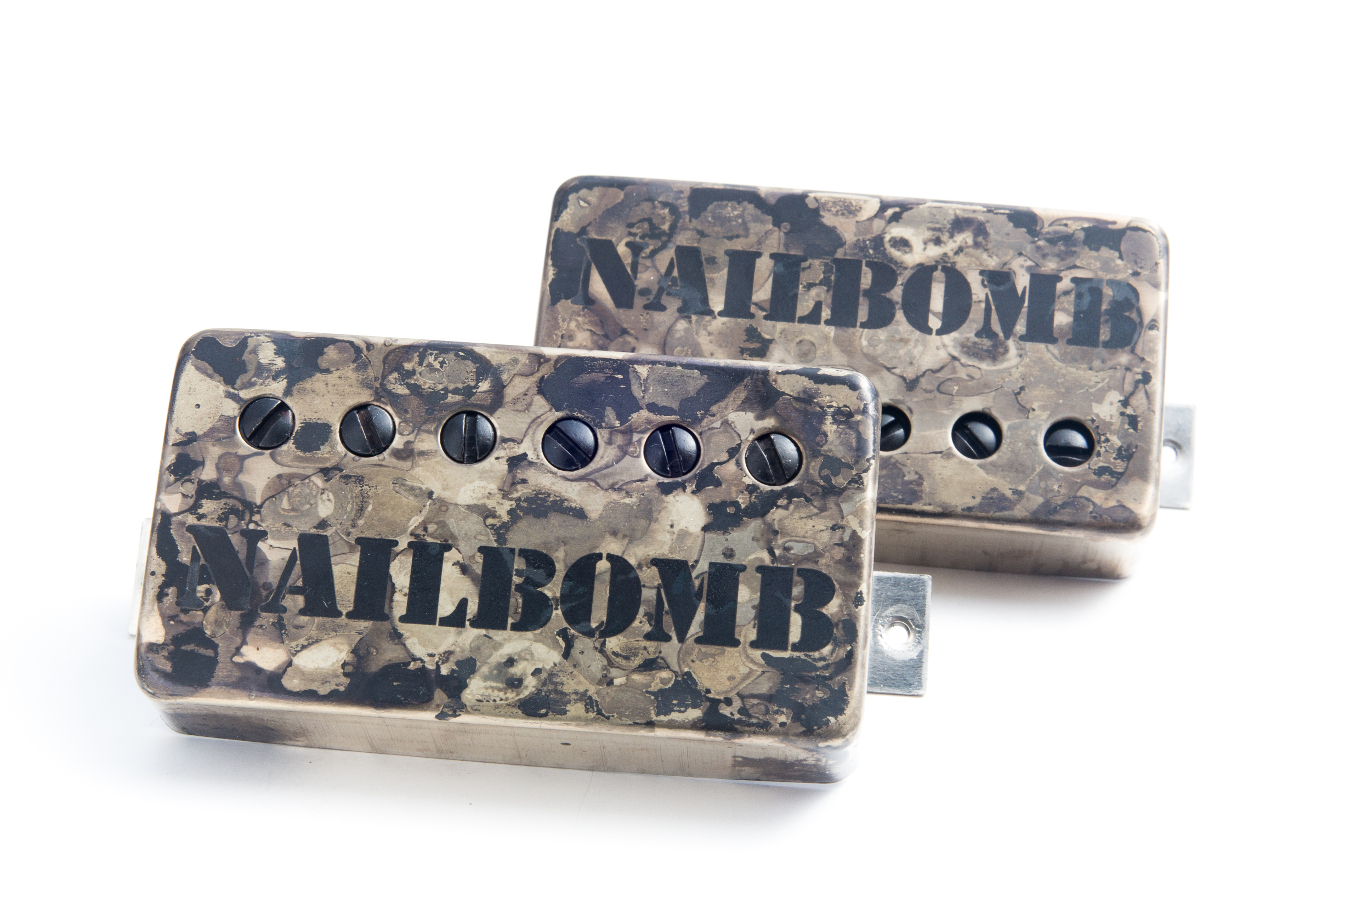 The Nailbomb humbucker is the perfect synergy of old-school and